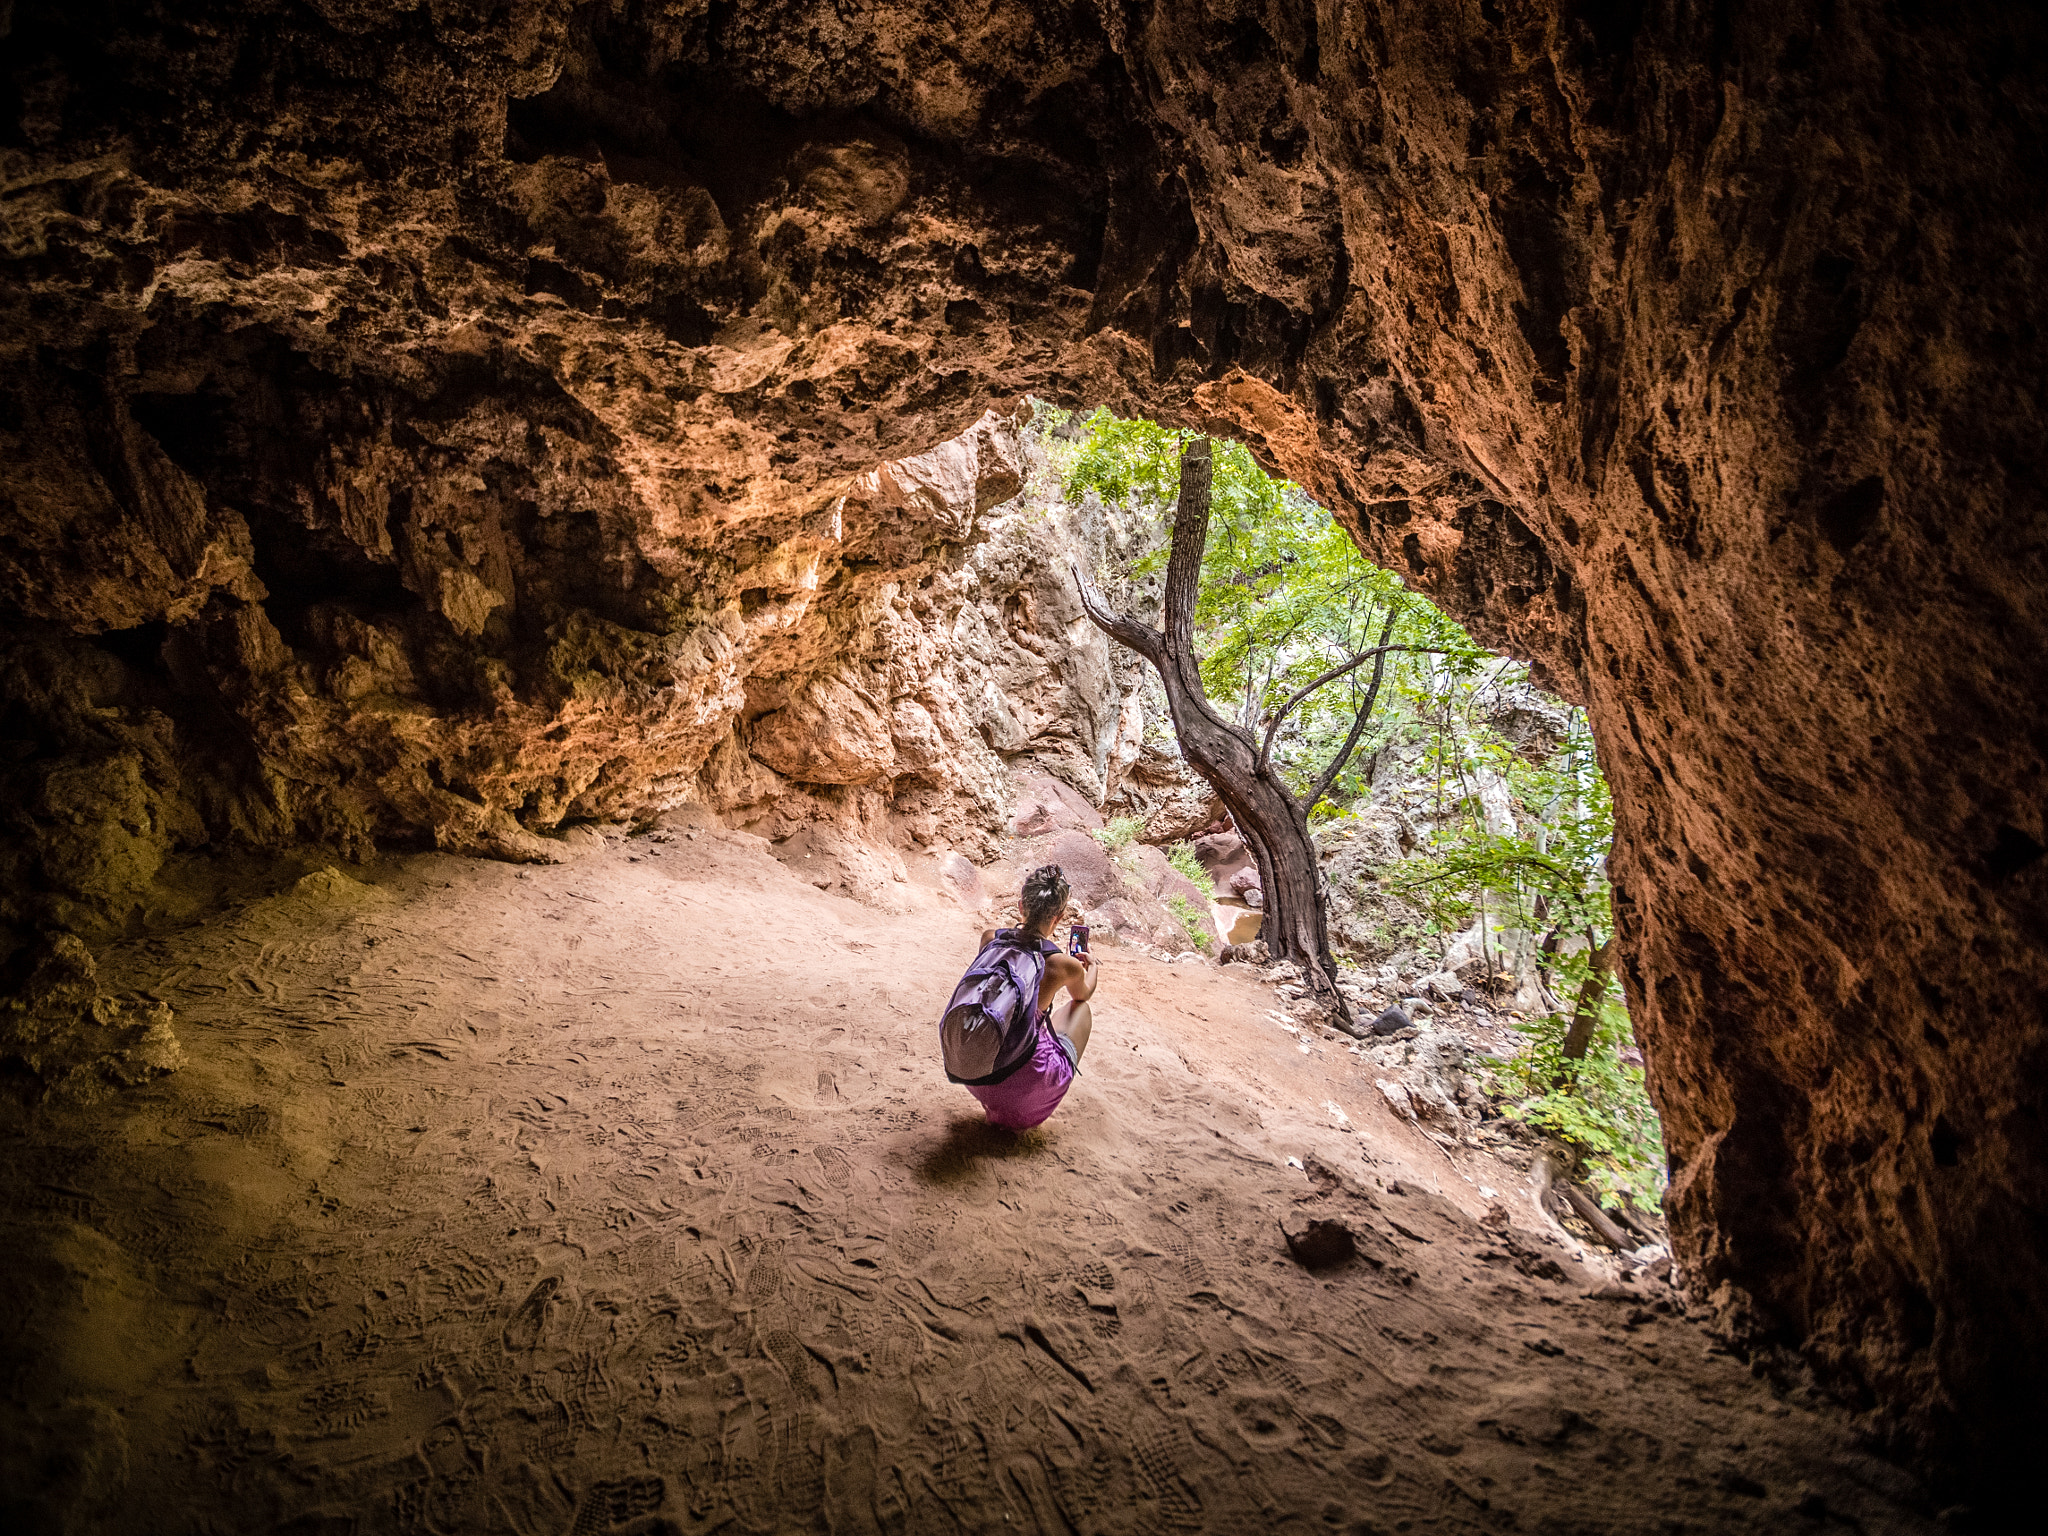 Panasonic Lumix DMC-GH4 sample photo. At the mouth of the cave photography